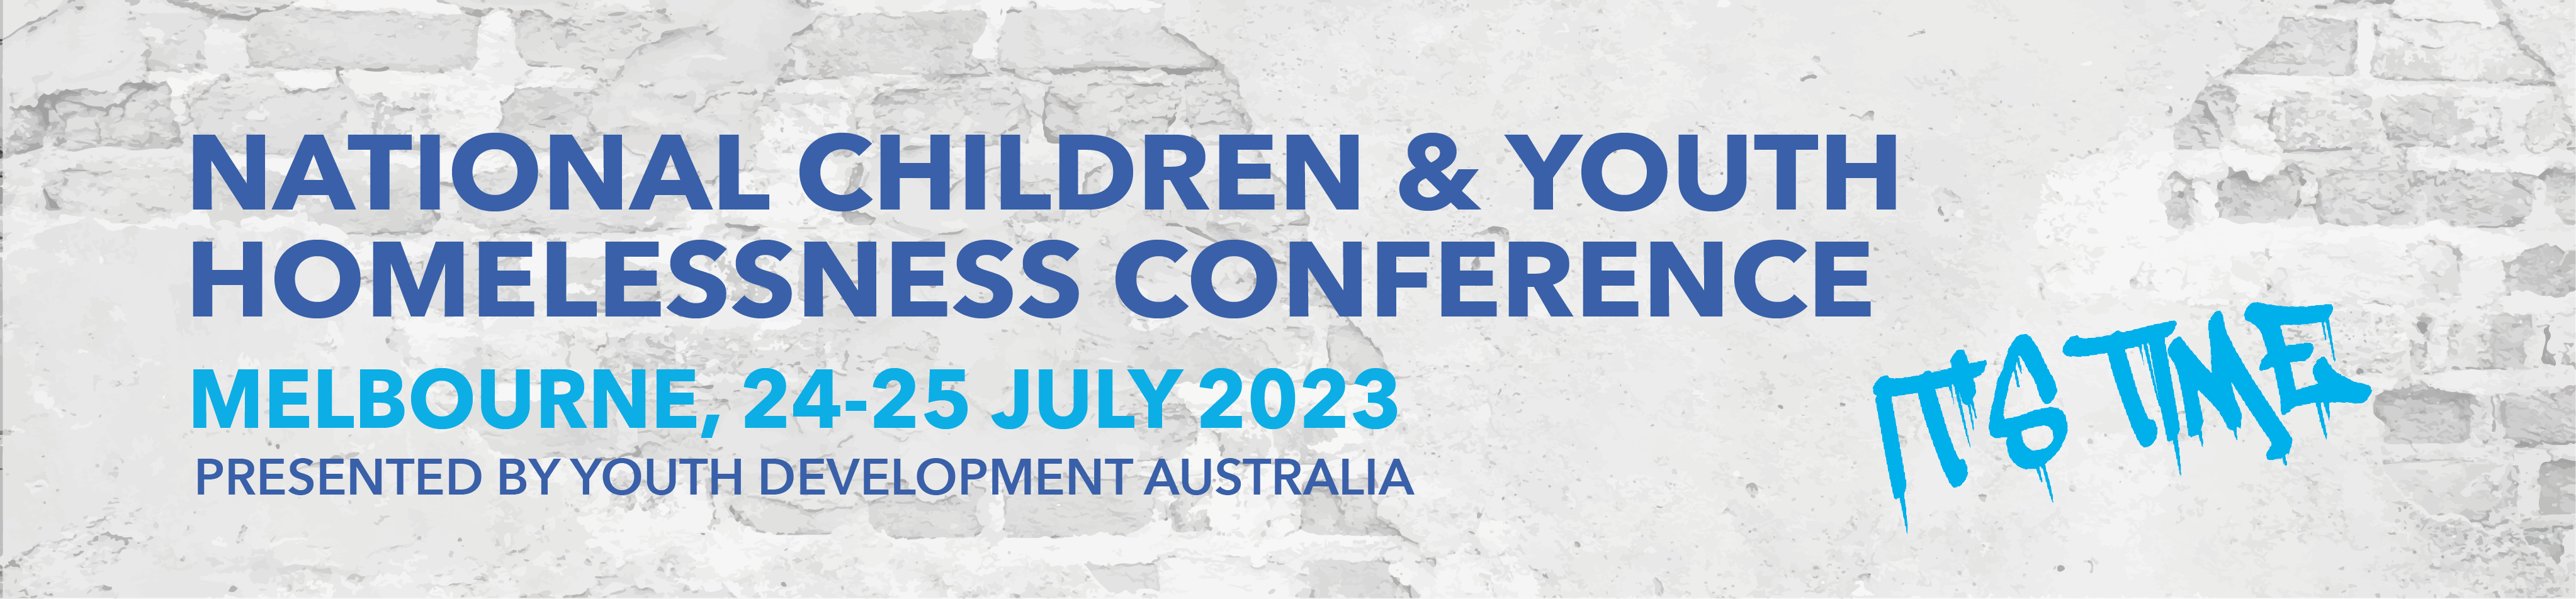 National Children and Youth Homelessness Conference 2023